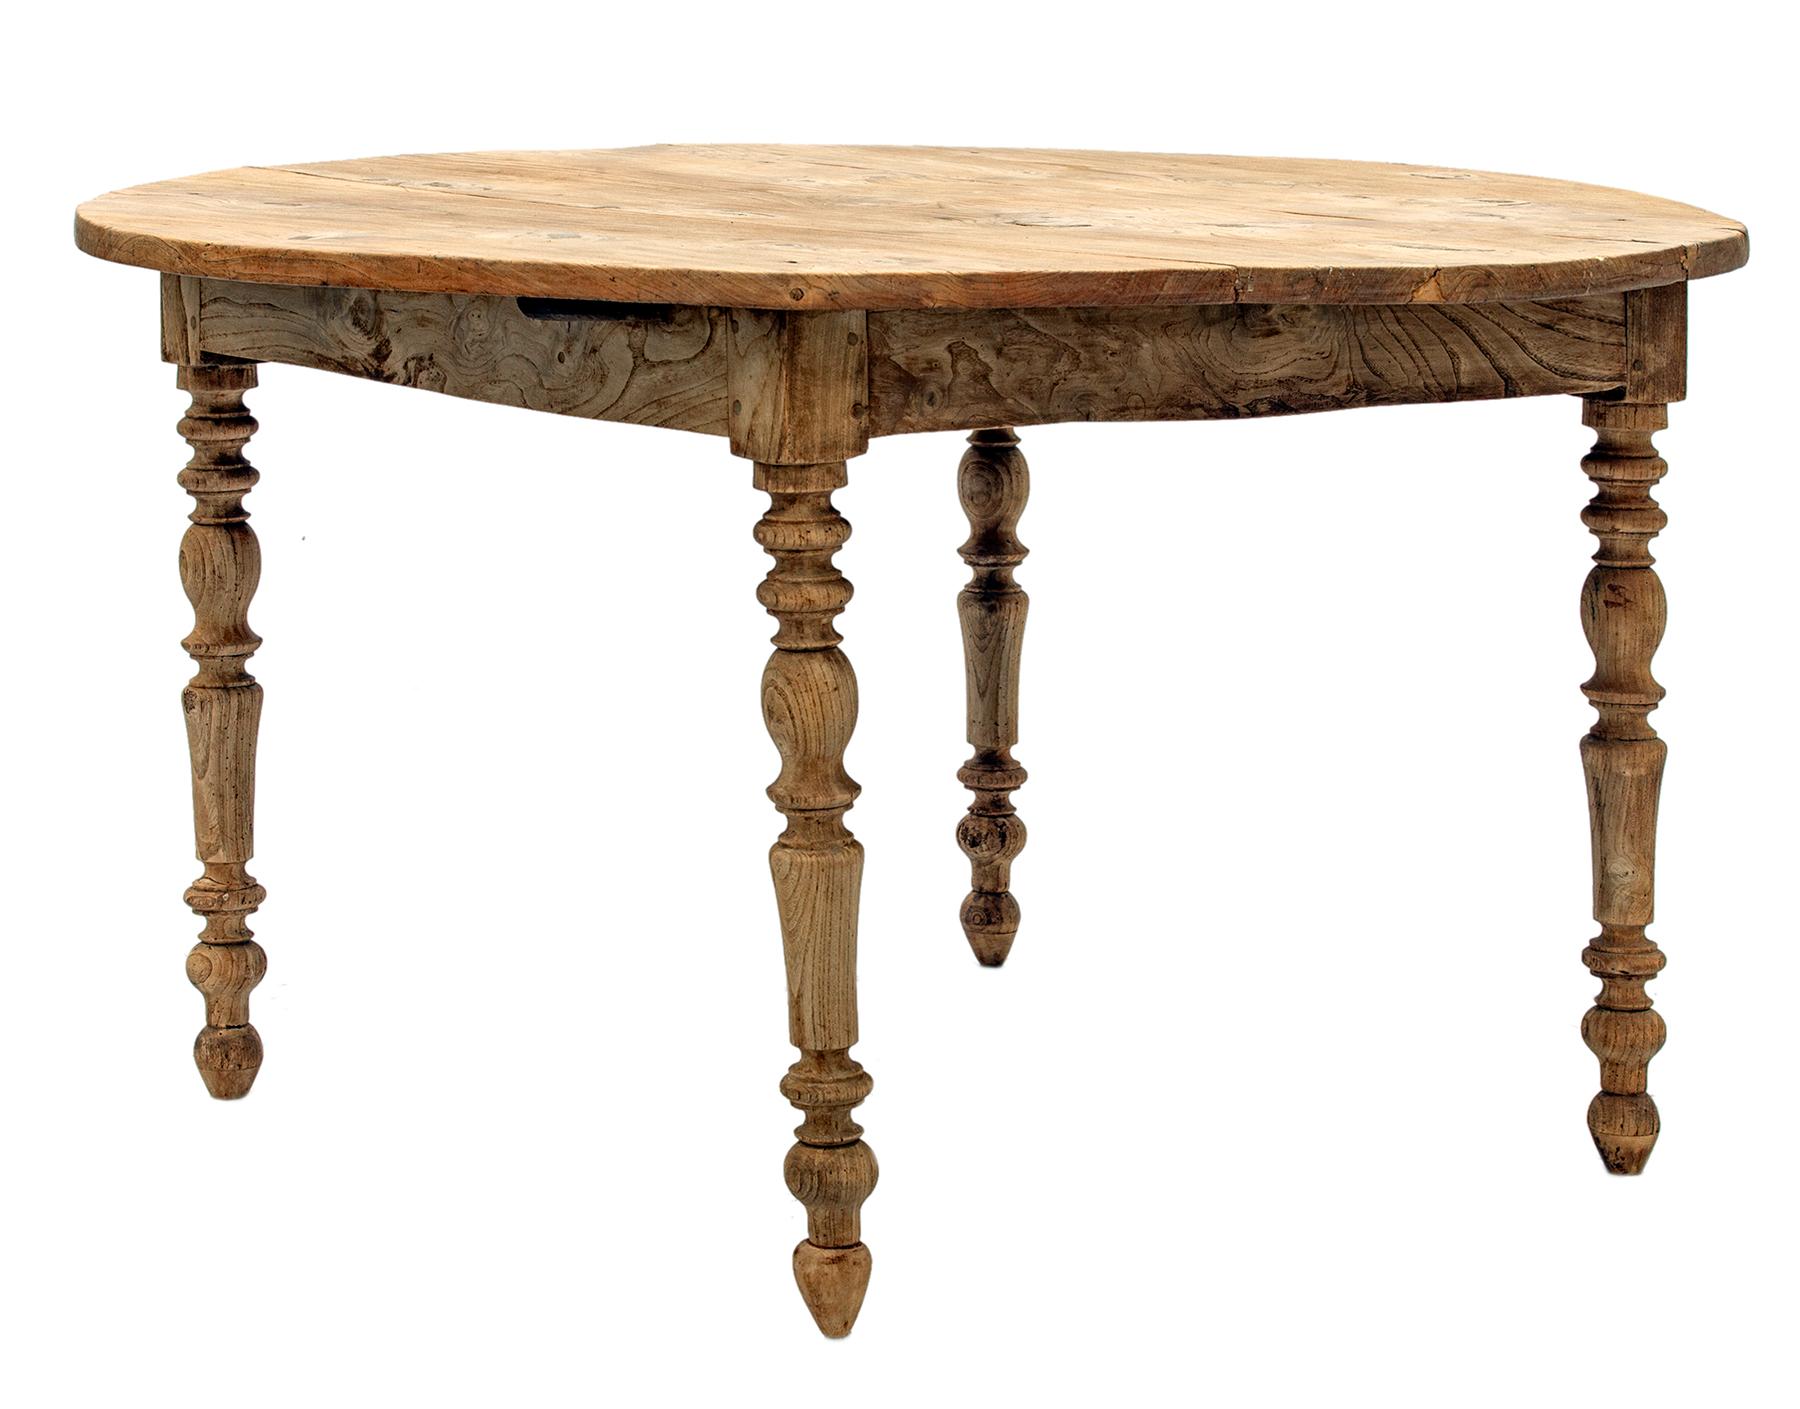 Late 18th Century European round table with a blonde patina.
This table has lots of warmth and visible history. The table is completely handcrafted, using handmade wooden pegs & & joints.
The tabletop is constructed with three panels which have rich